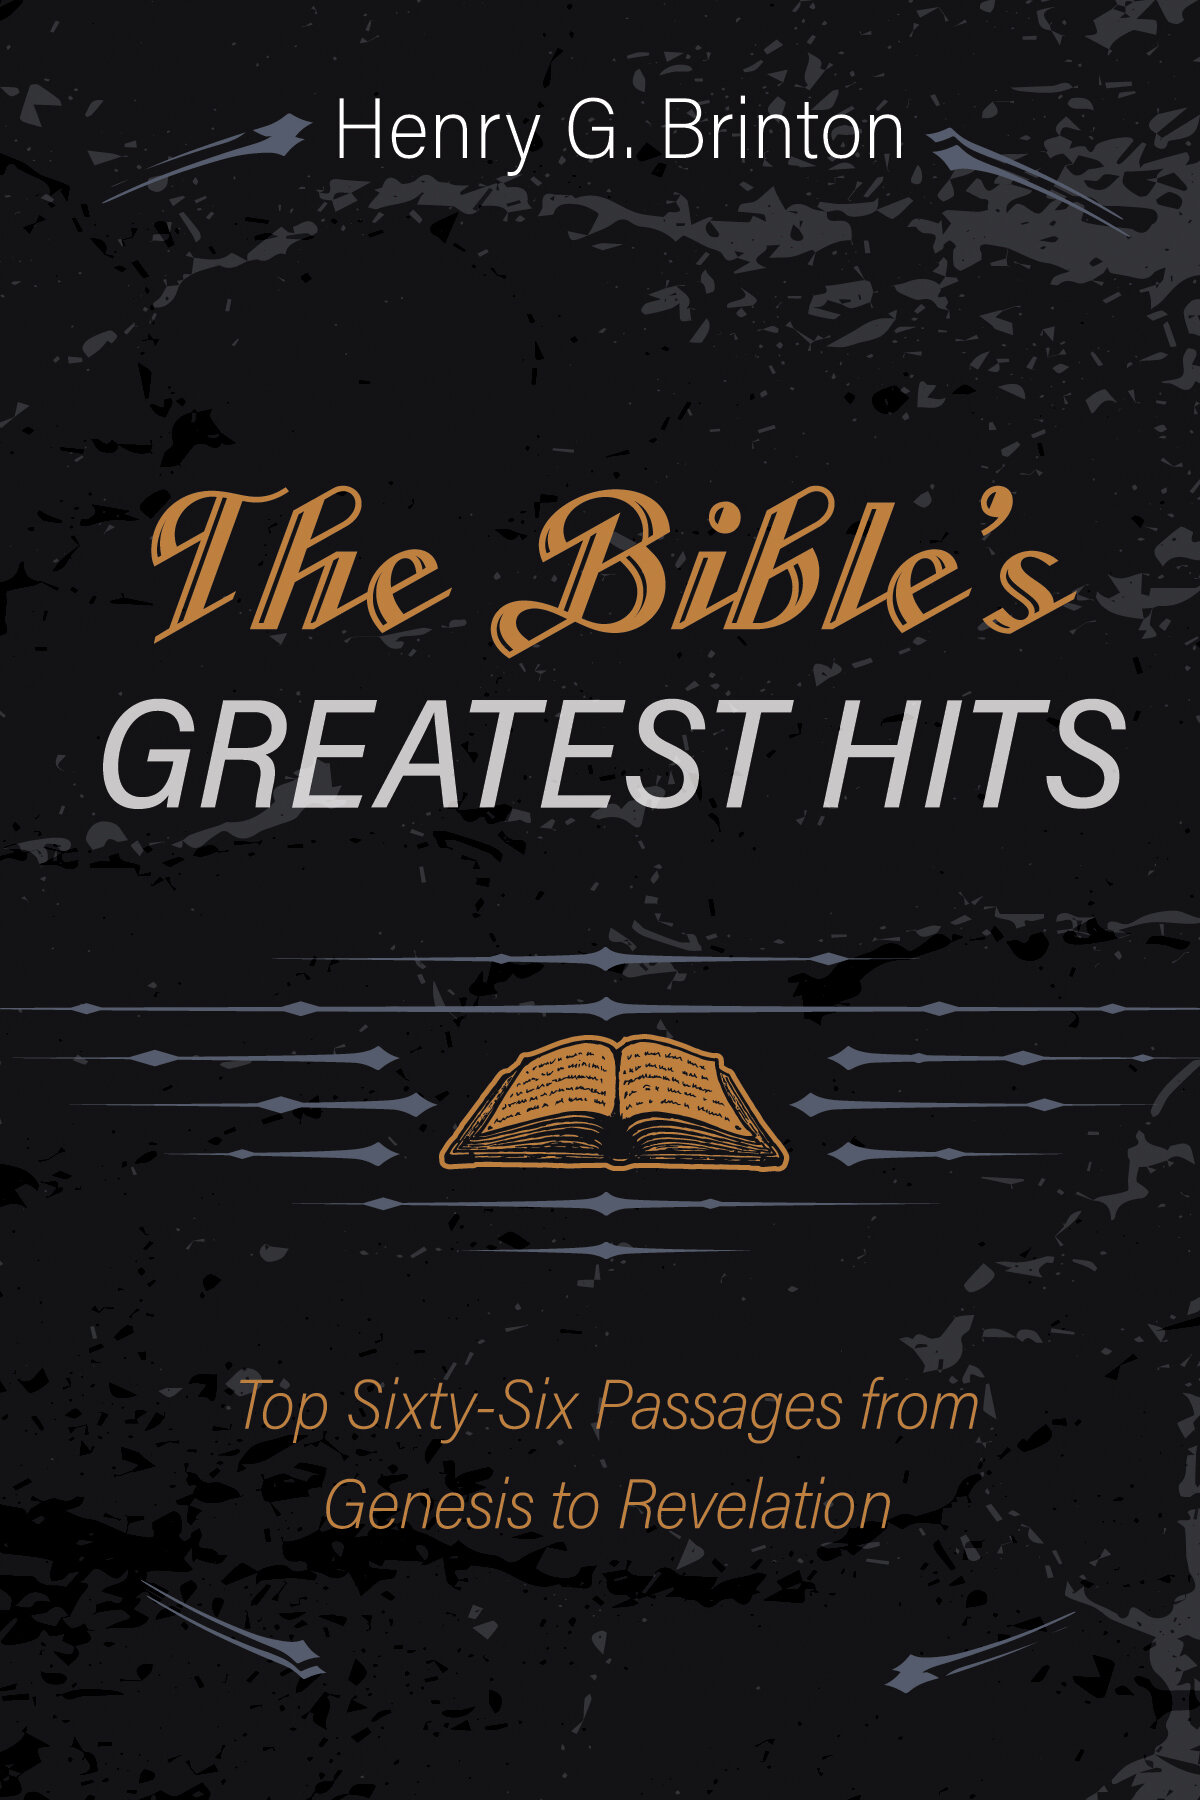 The Bible’s Greatest Hits: Top Sixty-Six Passages from Genesis to Revelation